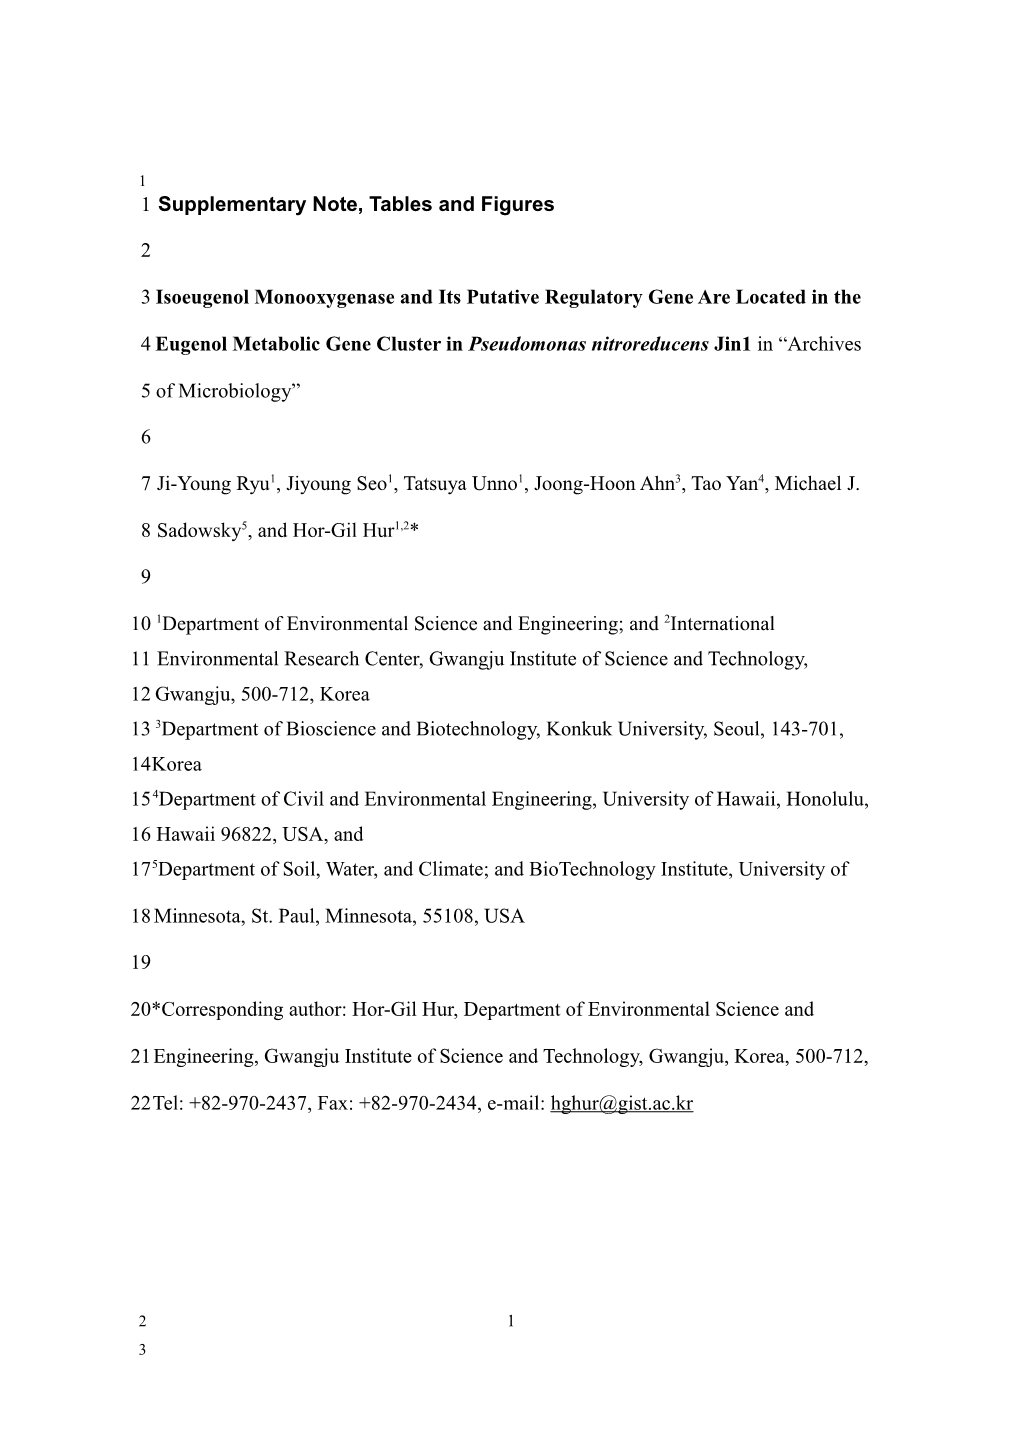 Research Proposal of Doctorial Dissertation